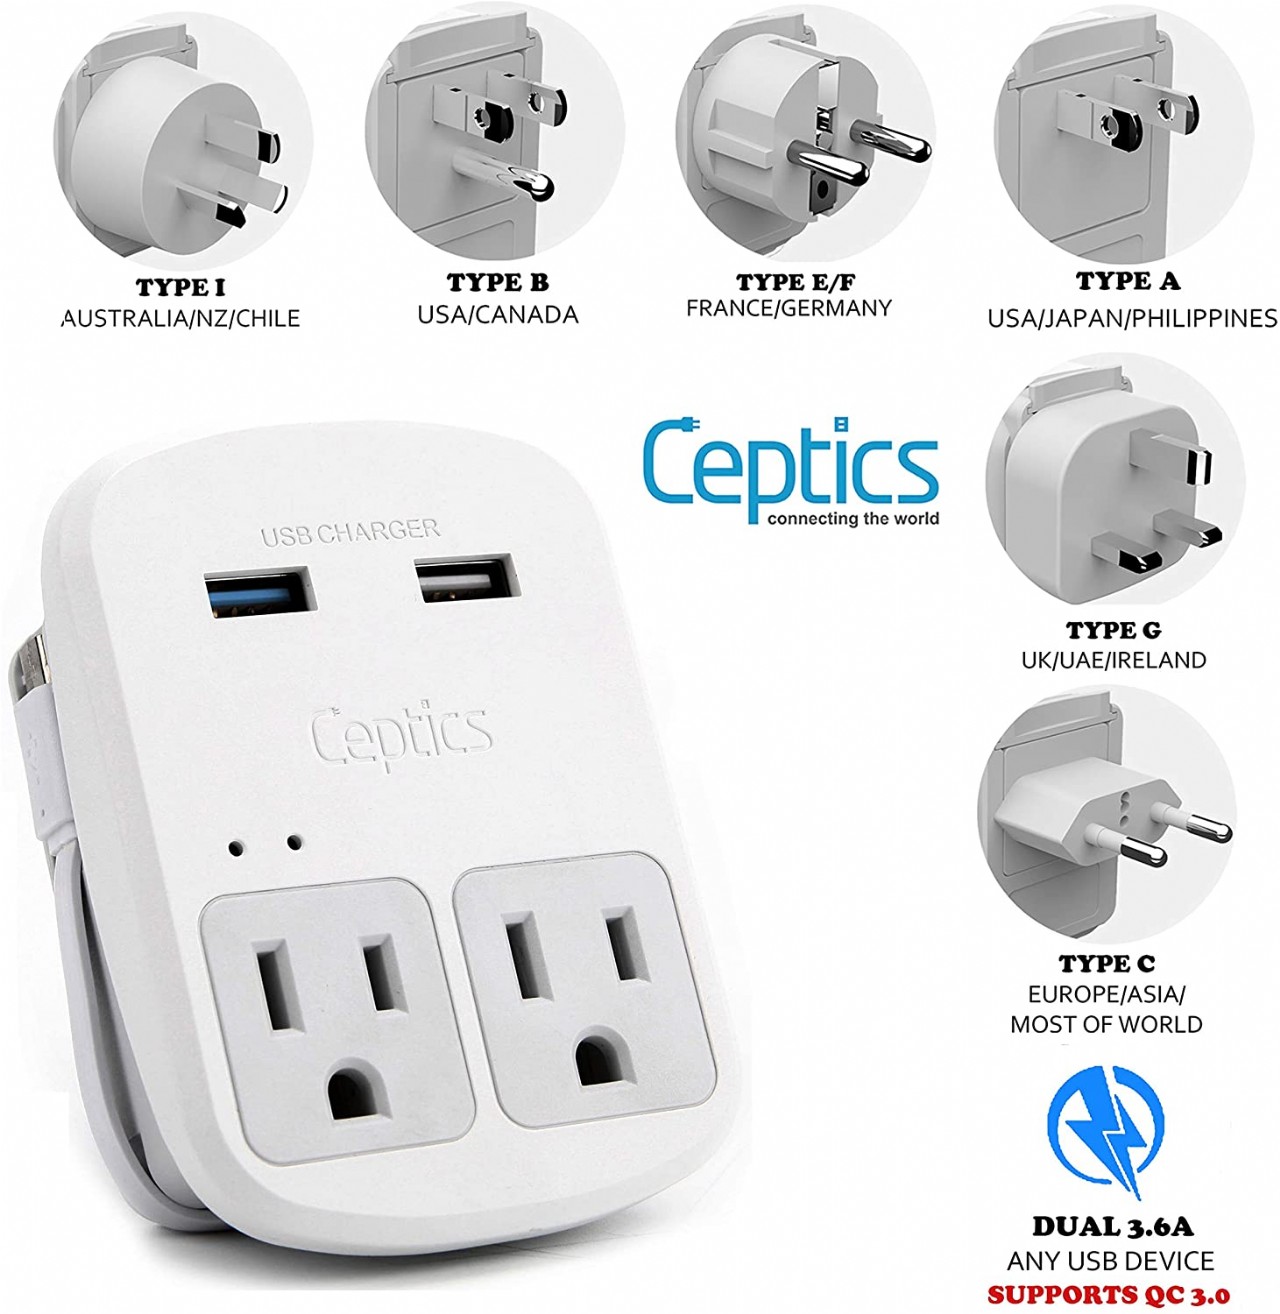 Safest Travel Adapter Kit, Dual USB for iPhone, Chargers, Cell Phones, Laptop Perfect for Travelers